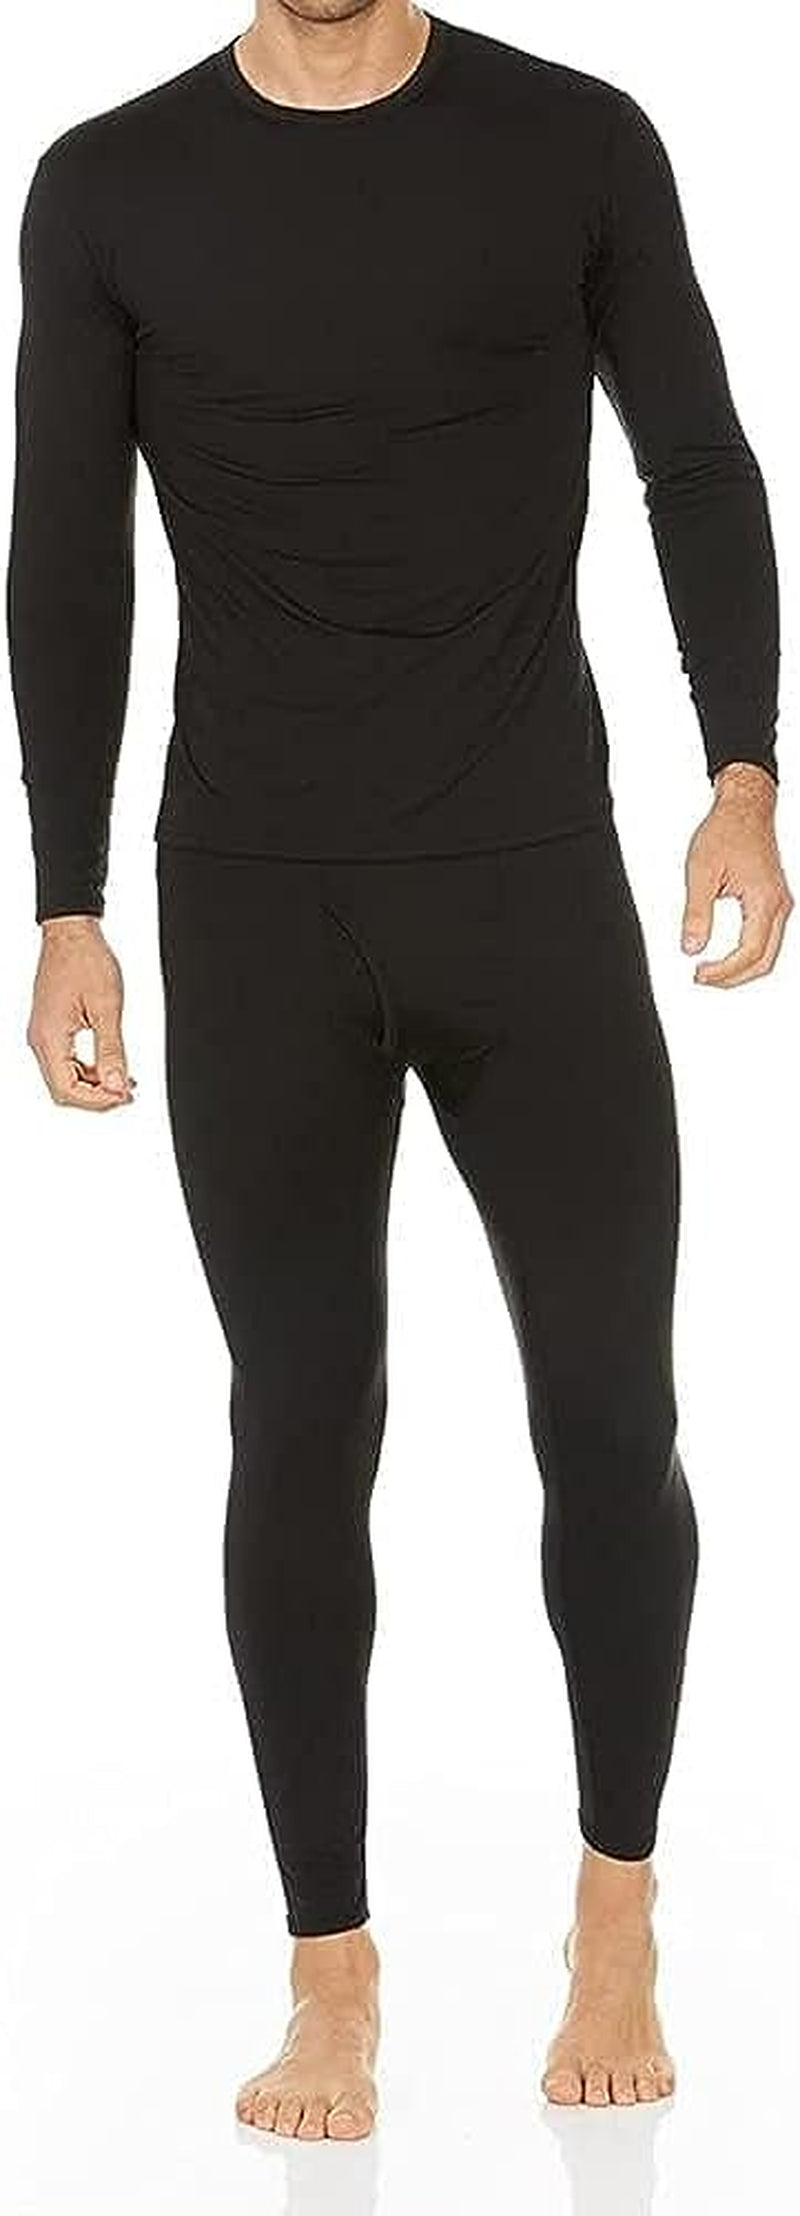 Long Johns Thermal Underwear for Men Fleece Lined Base Layer Set for Cold Weather